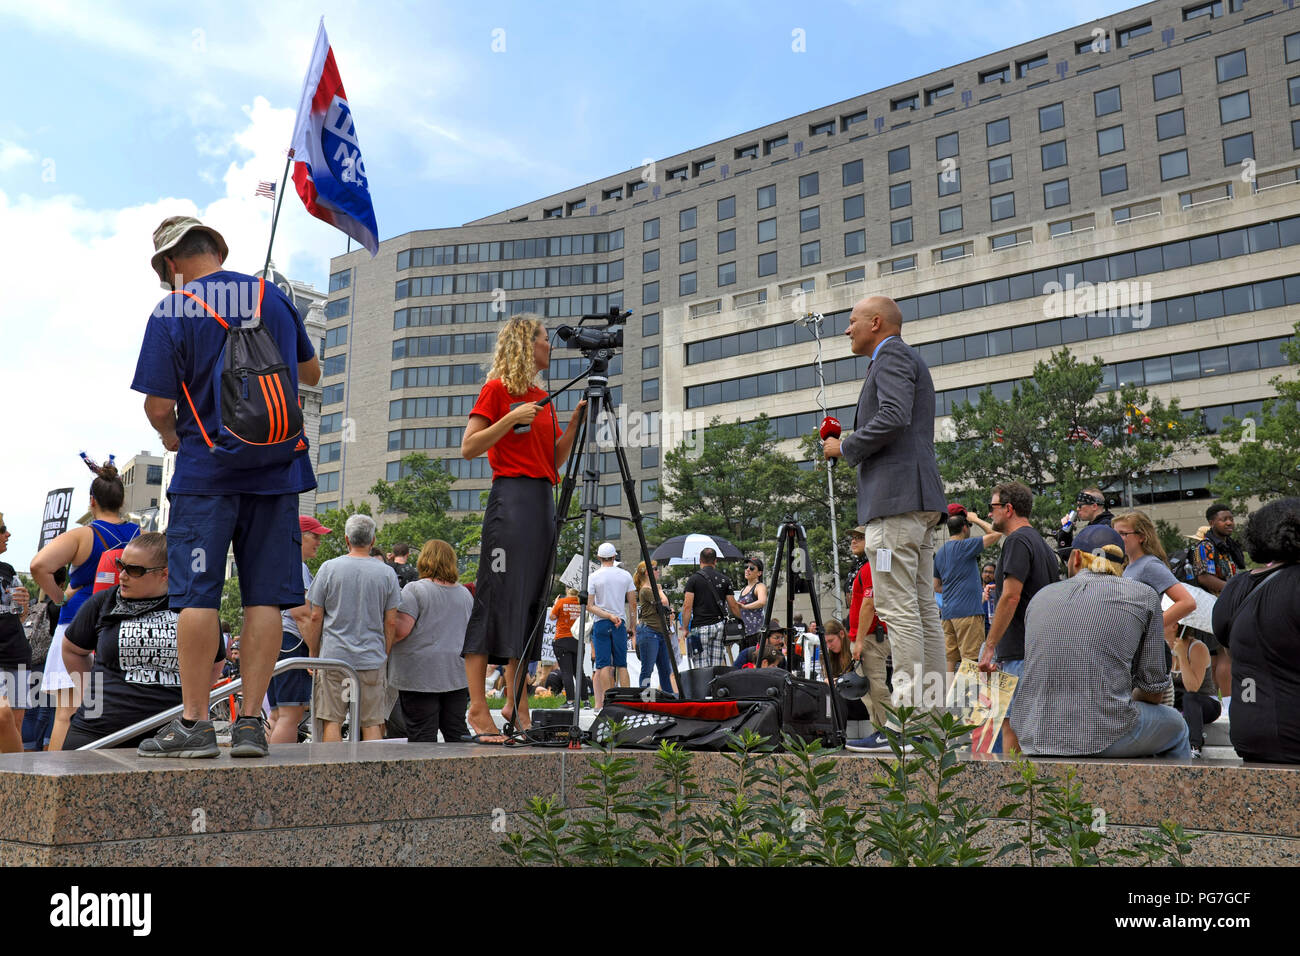 Television media broadcast live from Freedom Park in Washington DC on August 12, 2018 where staging for the anti alt-right protest is occurring. Stock Photo